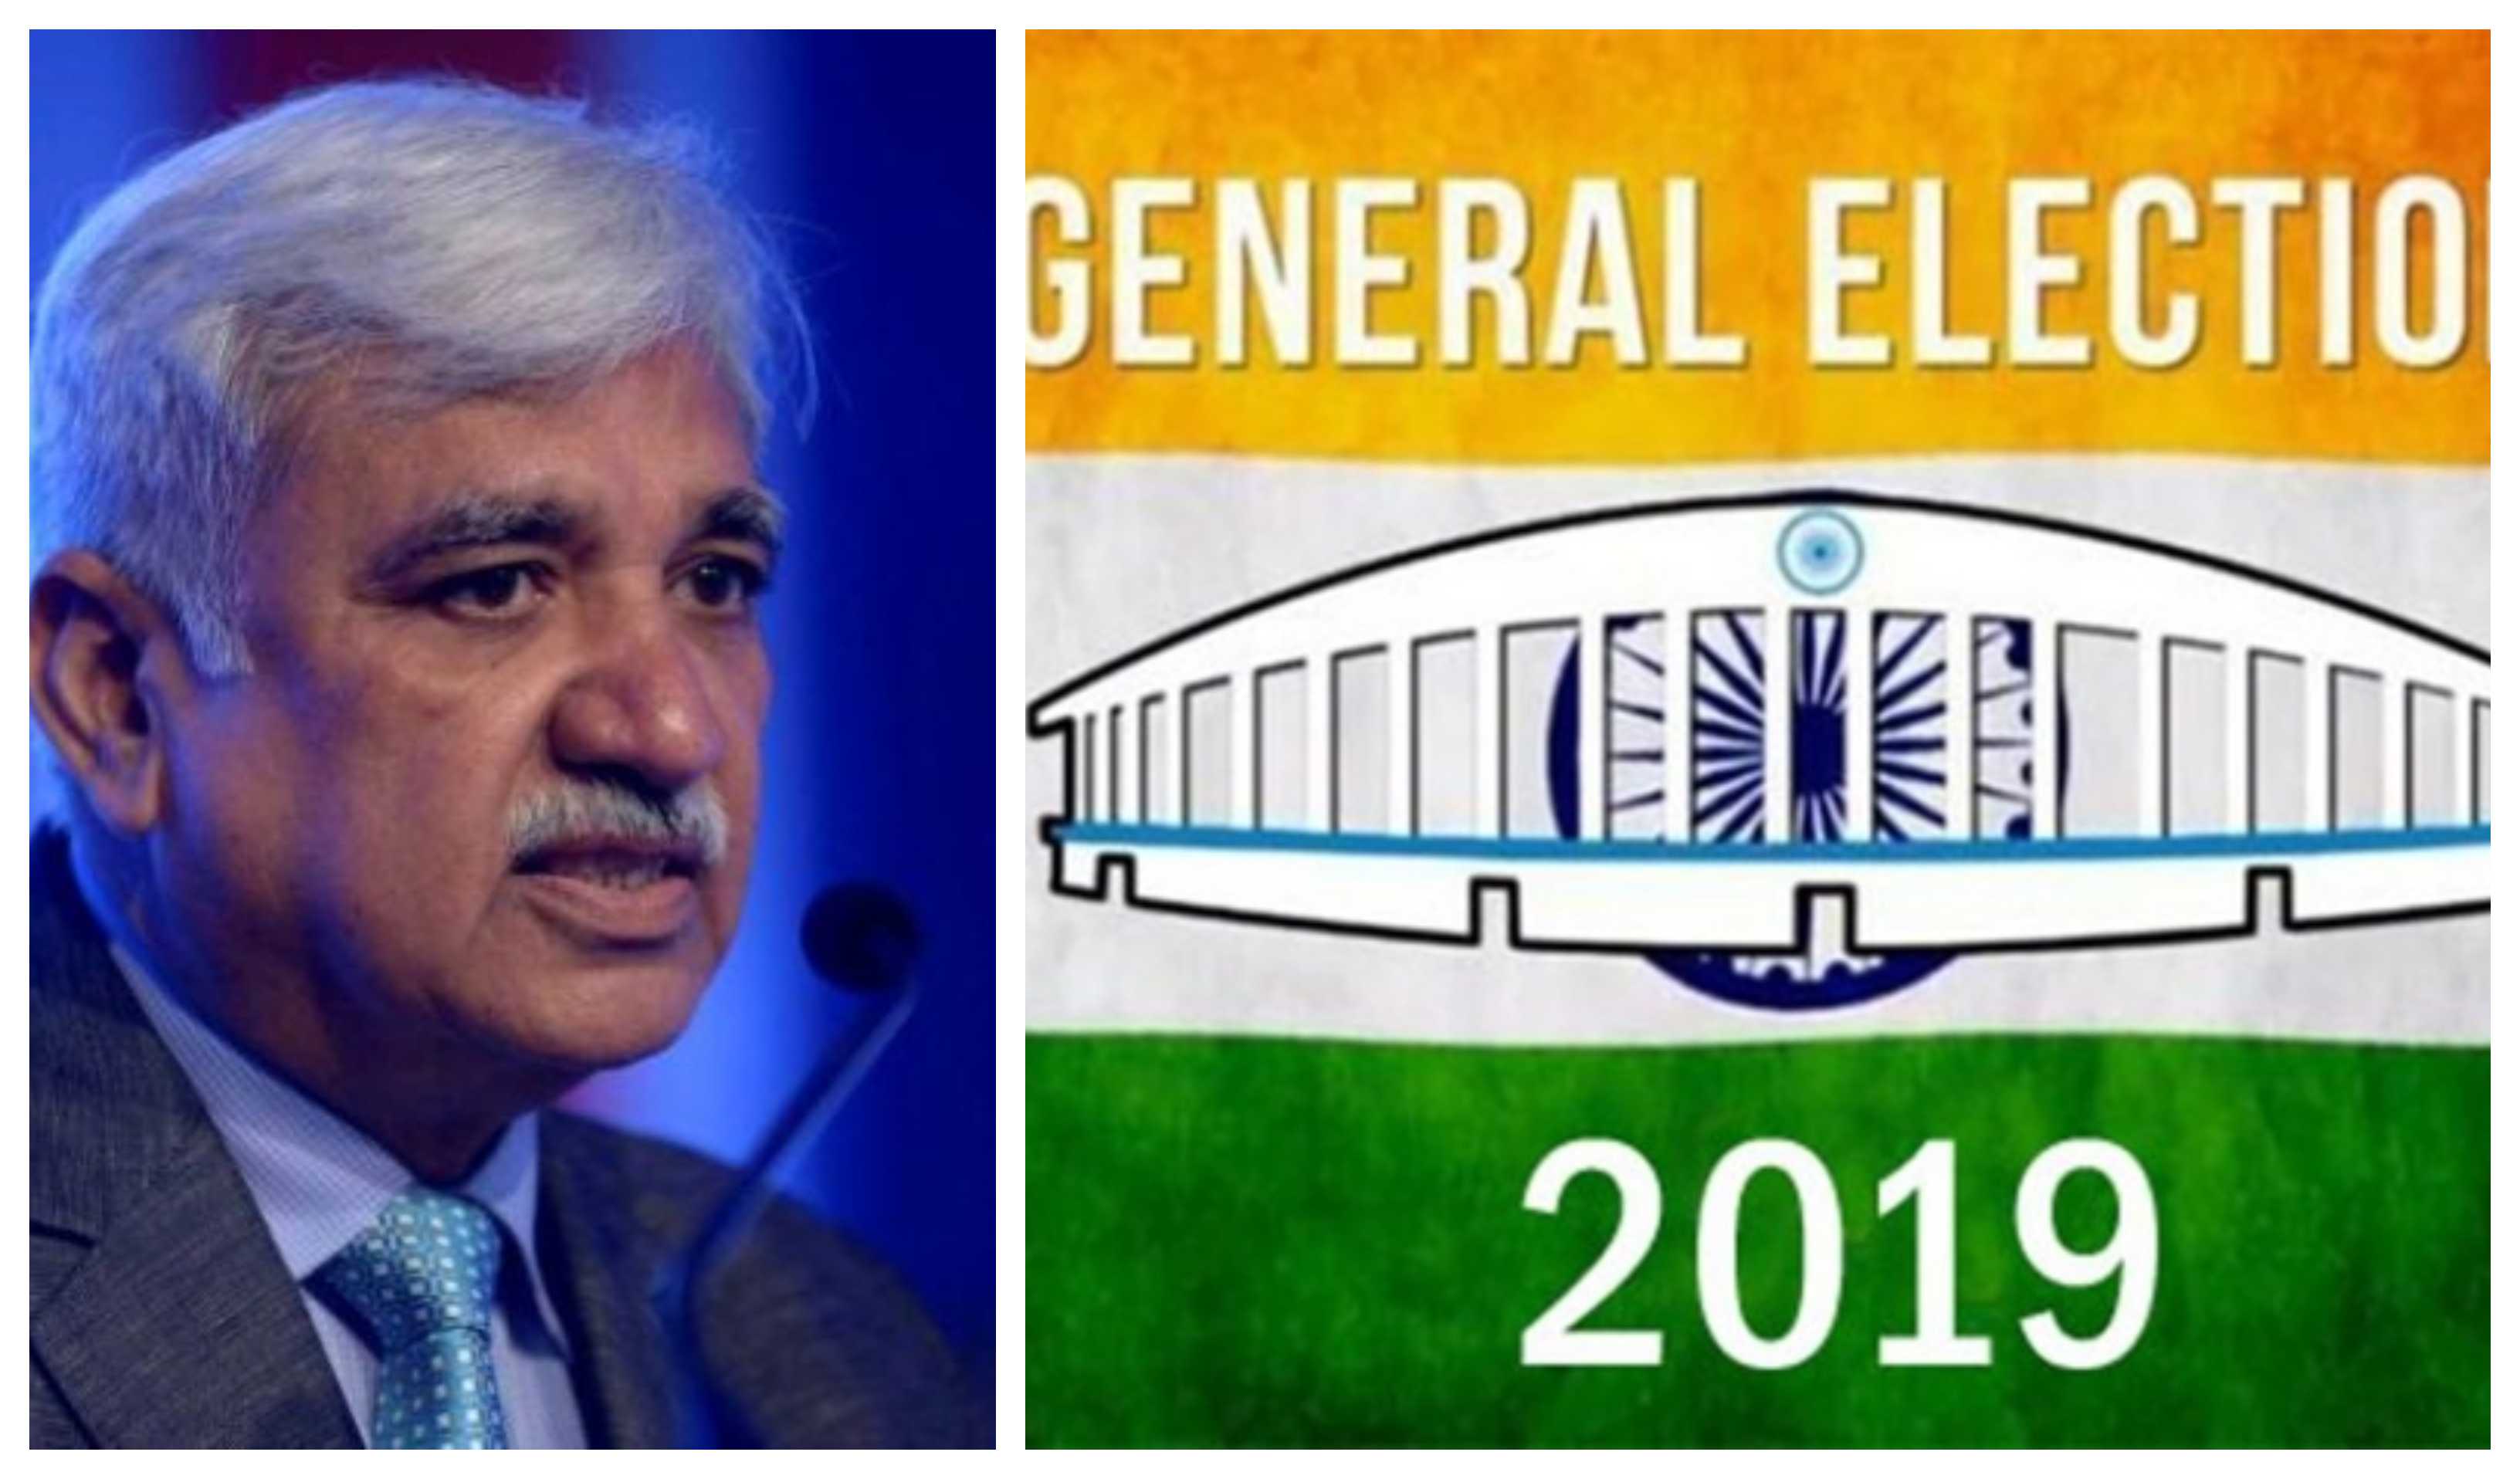 Sunil Arora briefing election commission conference for 2019 elections